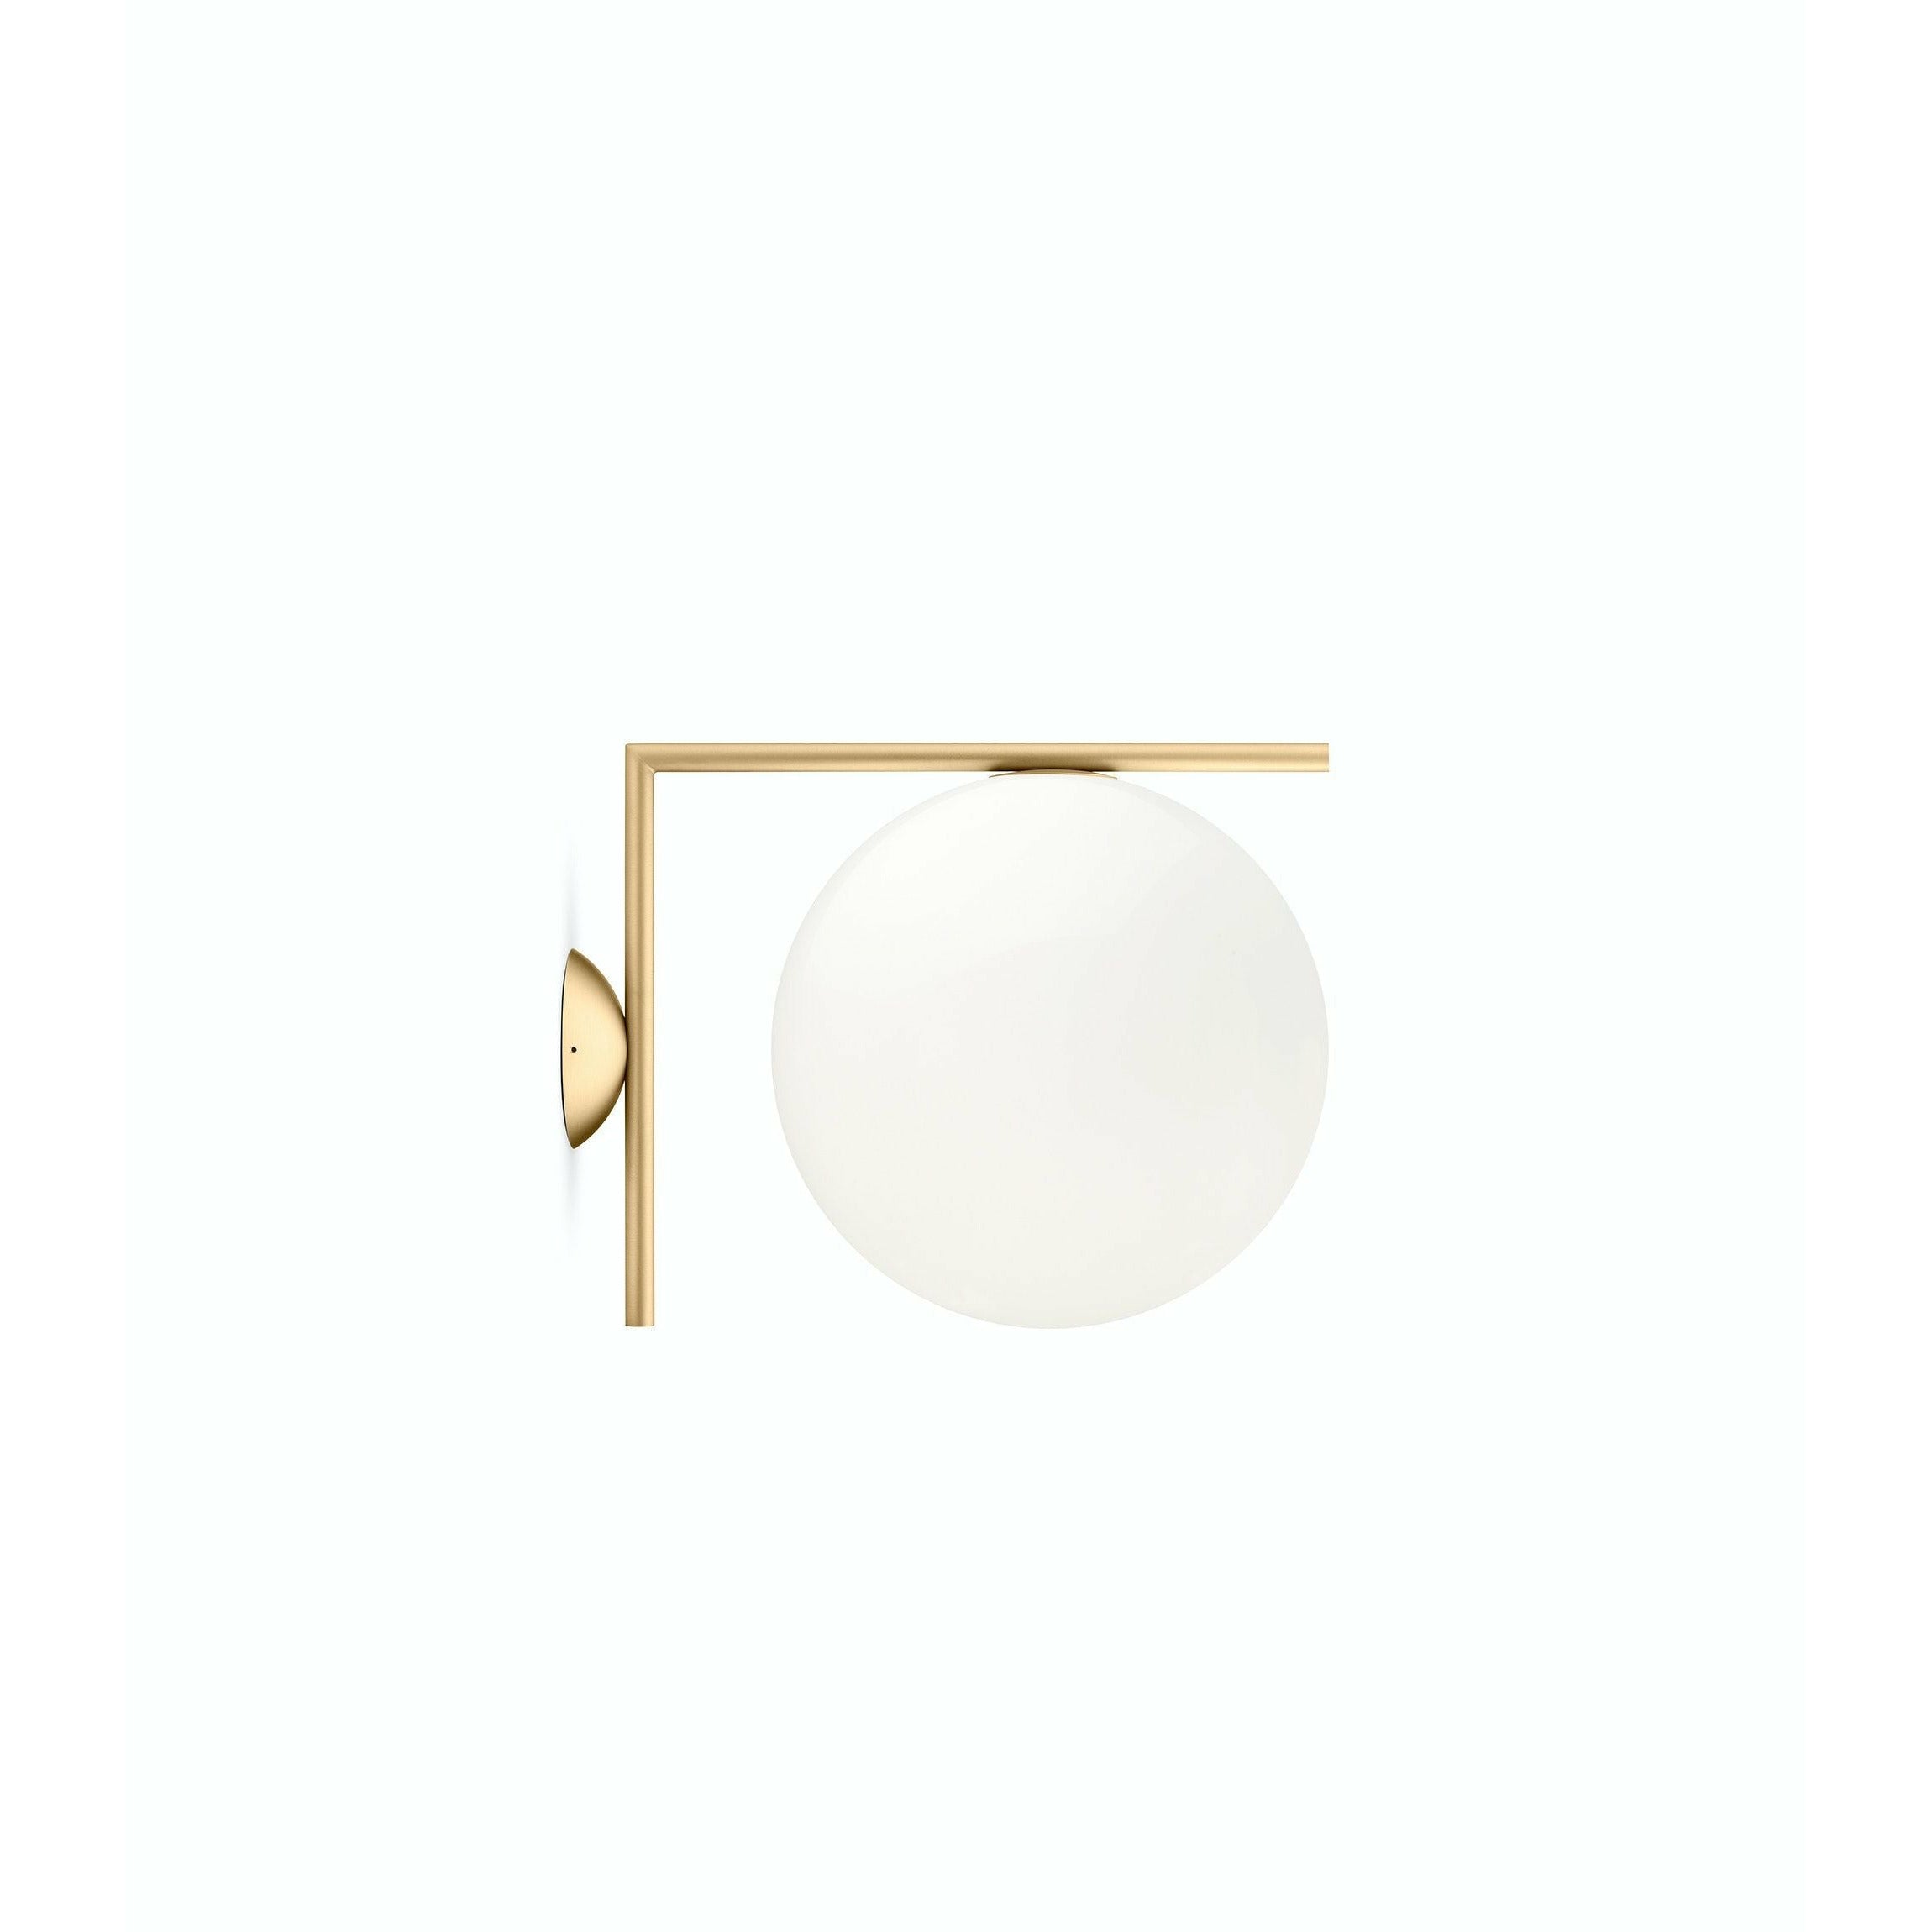 FLOS IC Light C/W2 Wand/Deckenlampe, Messing